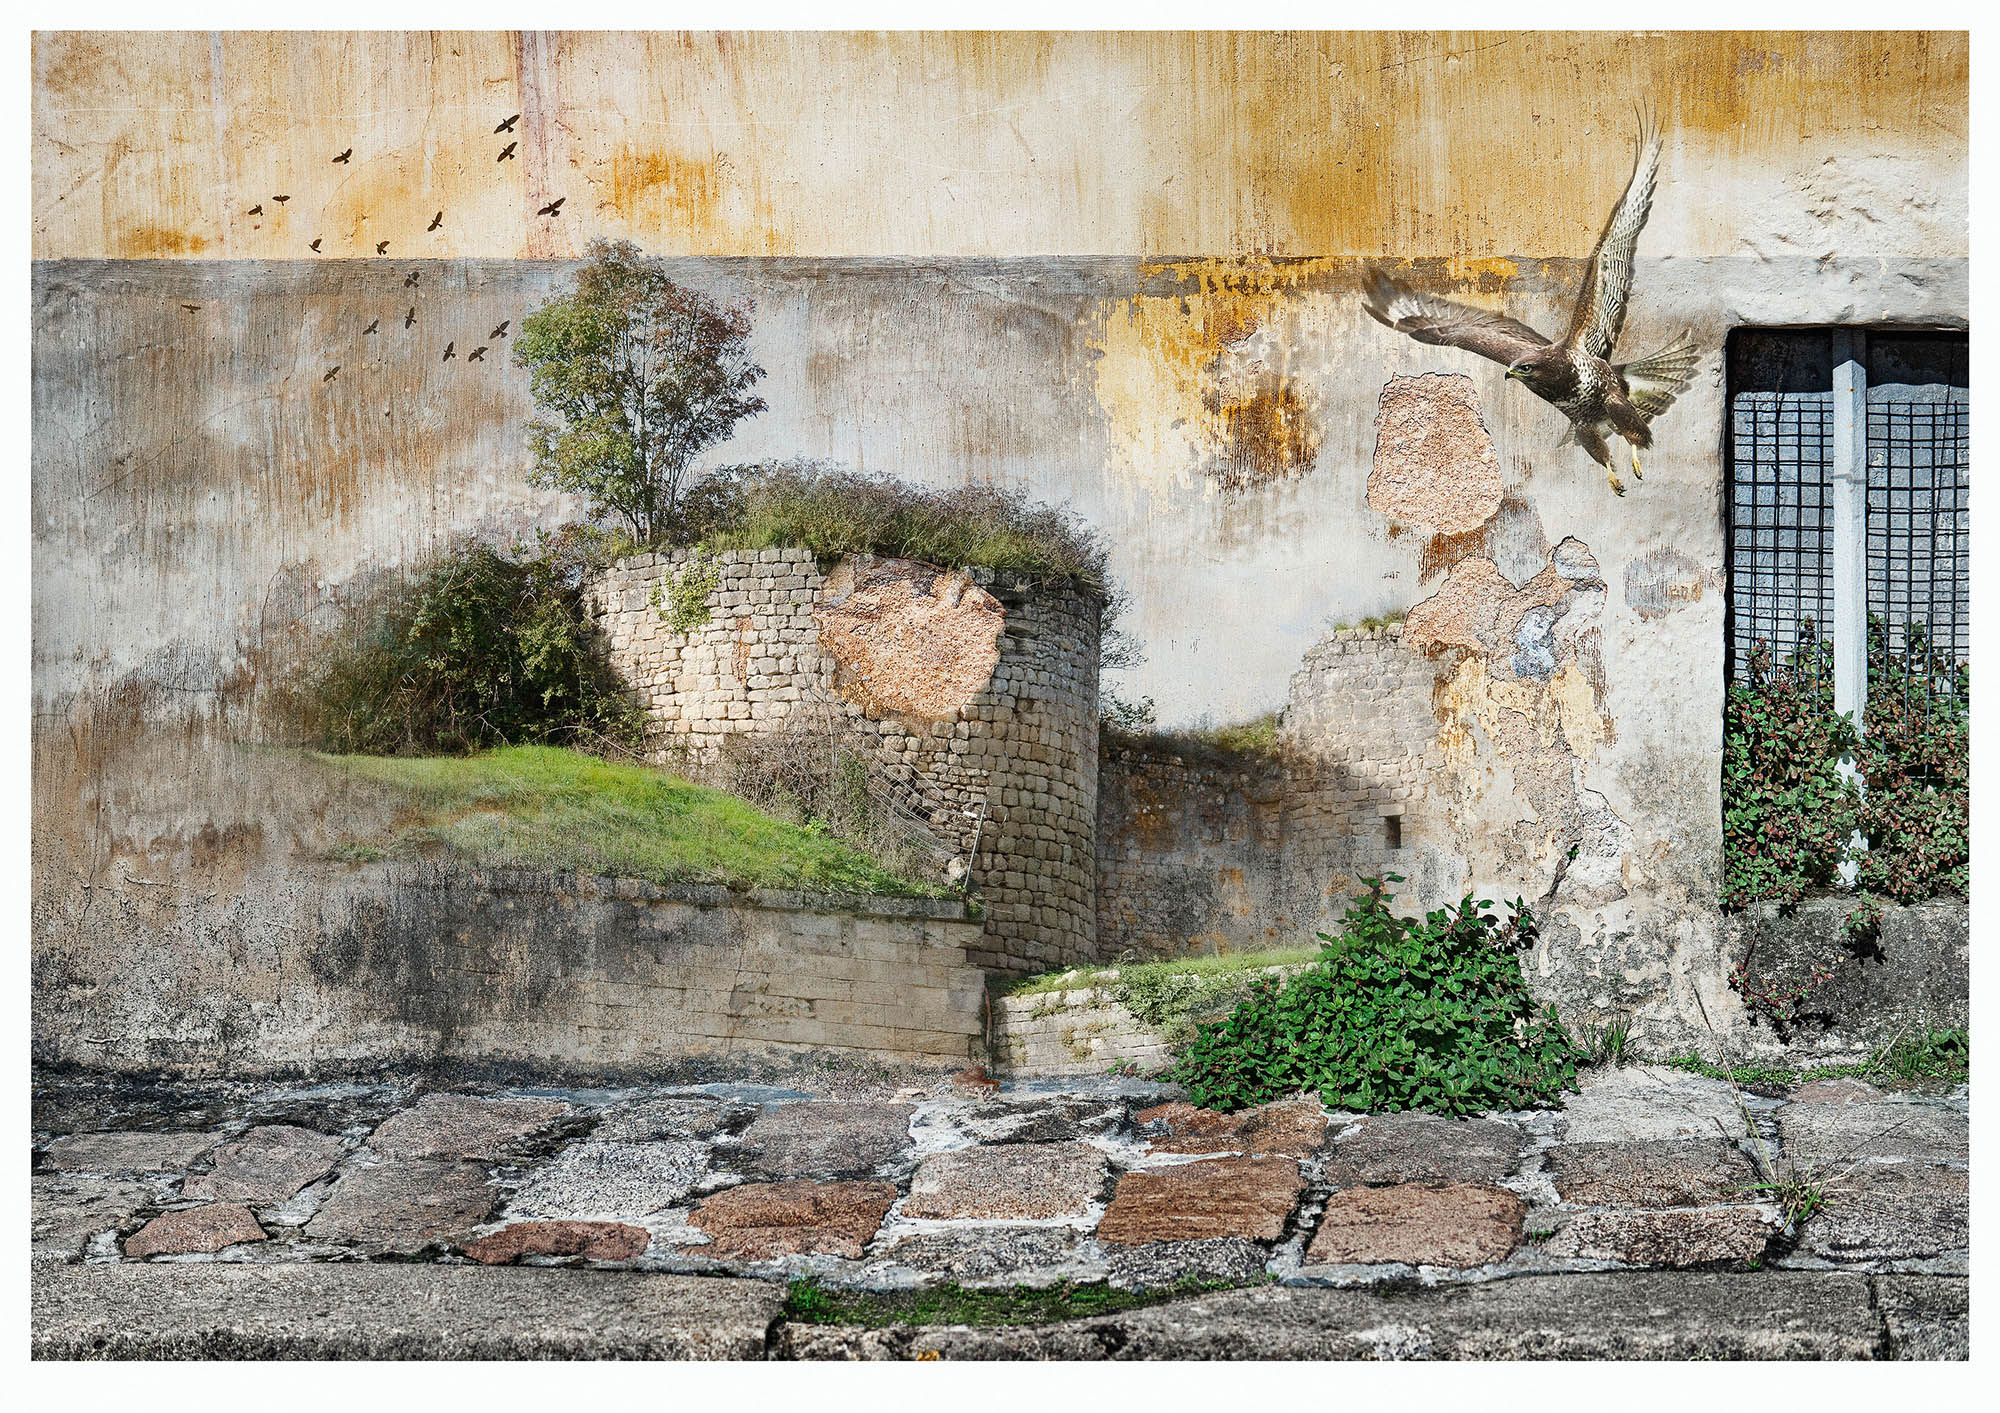 Composite photograph of distressed wall, trees, a deer all forming a surrreal landscape